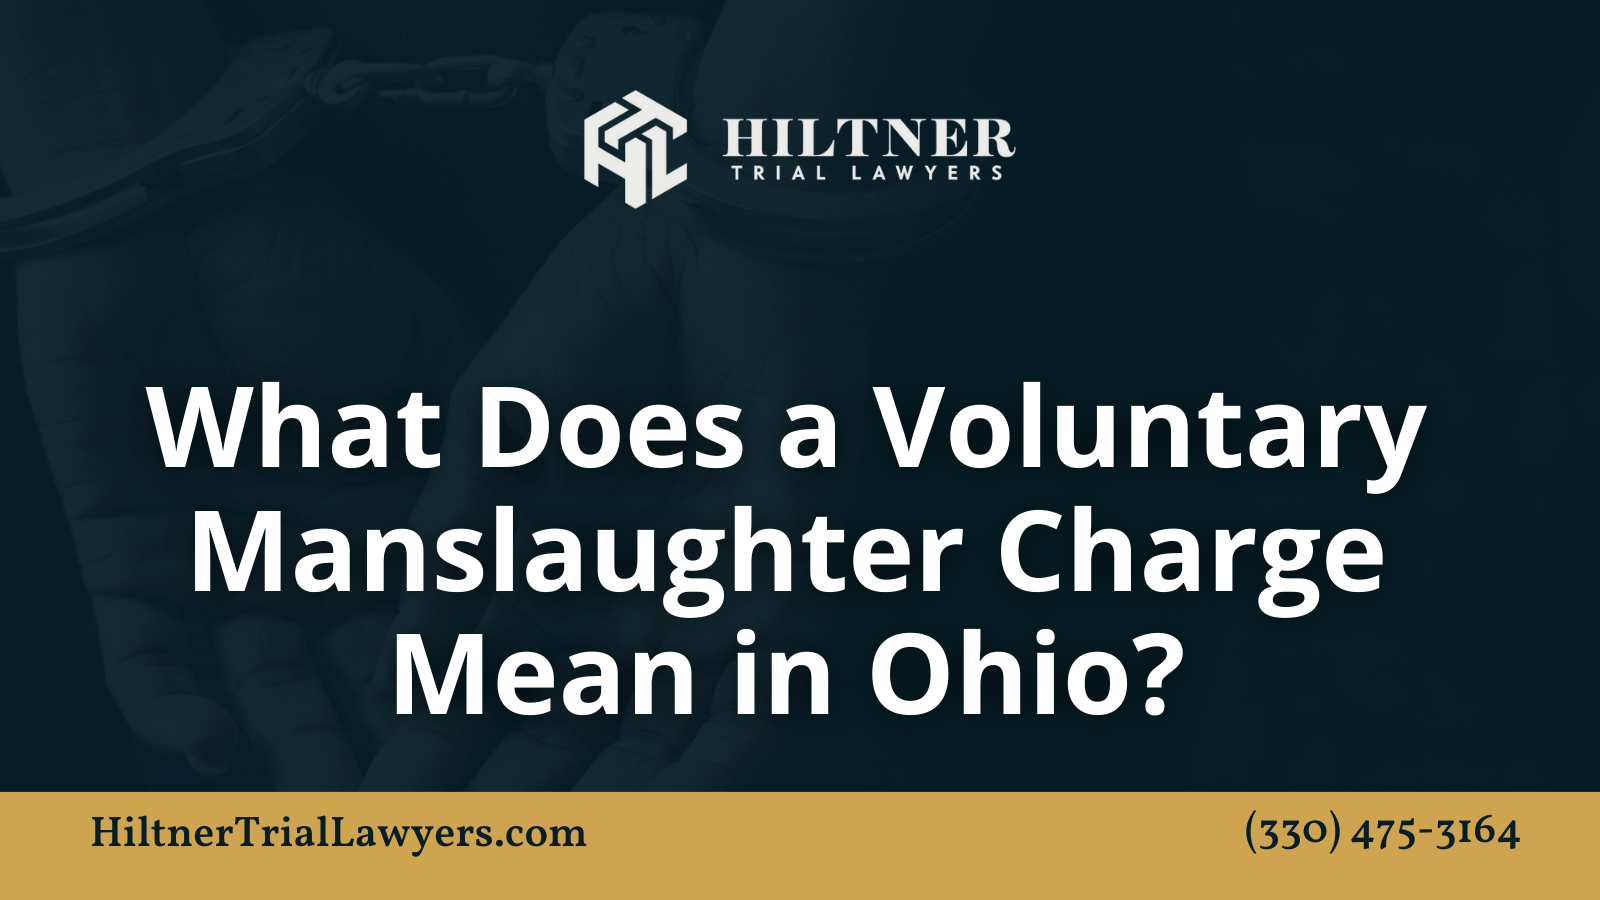 What Does a Voluntary Manslaughter Charge Mean in Ohio